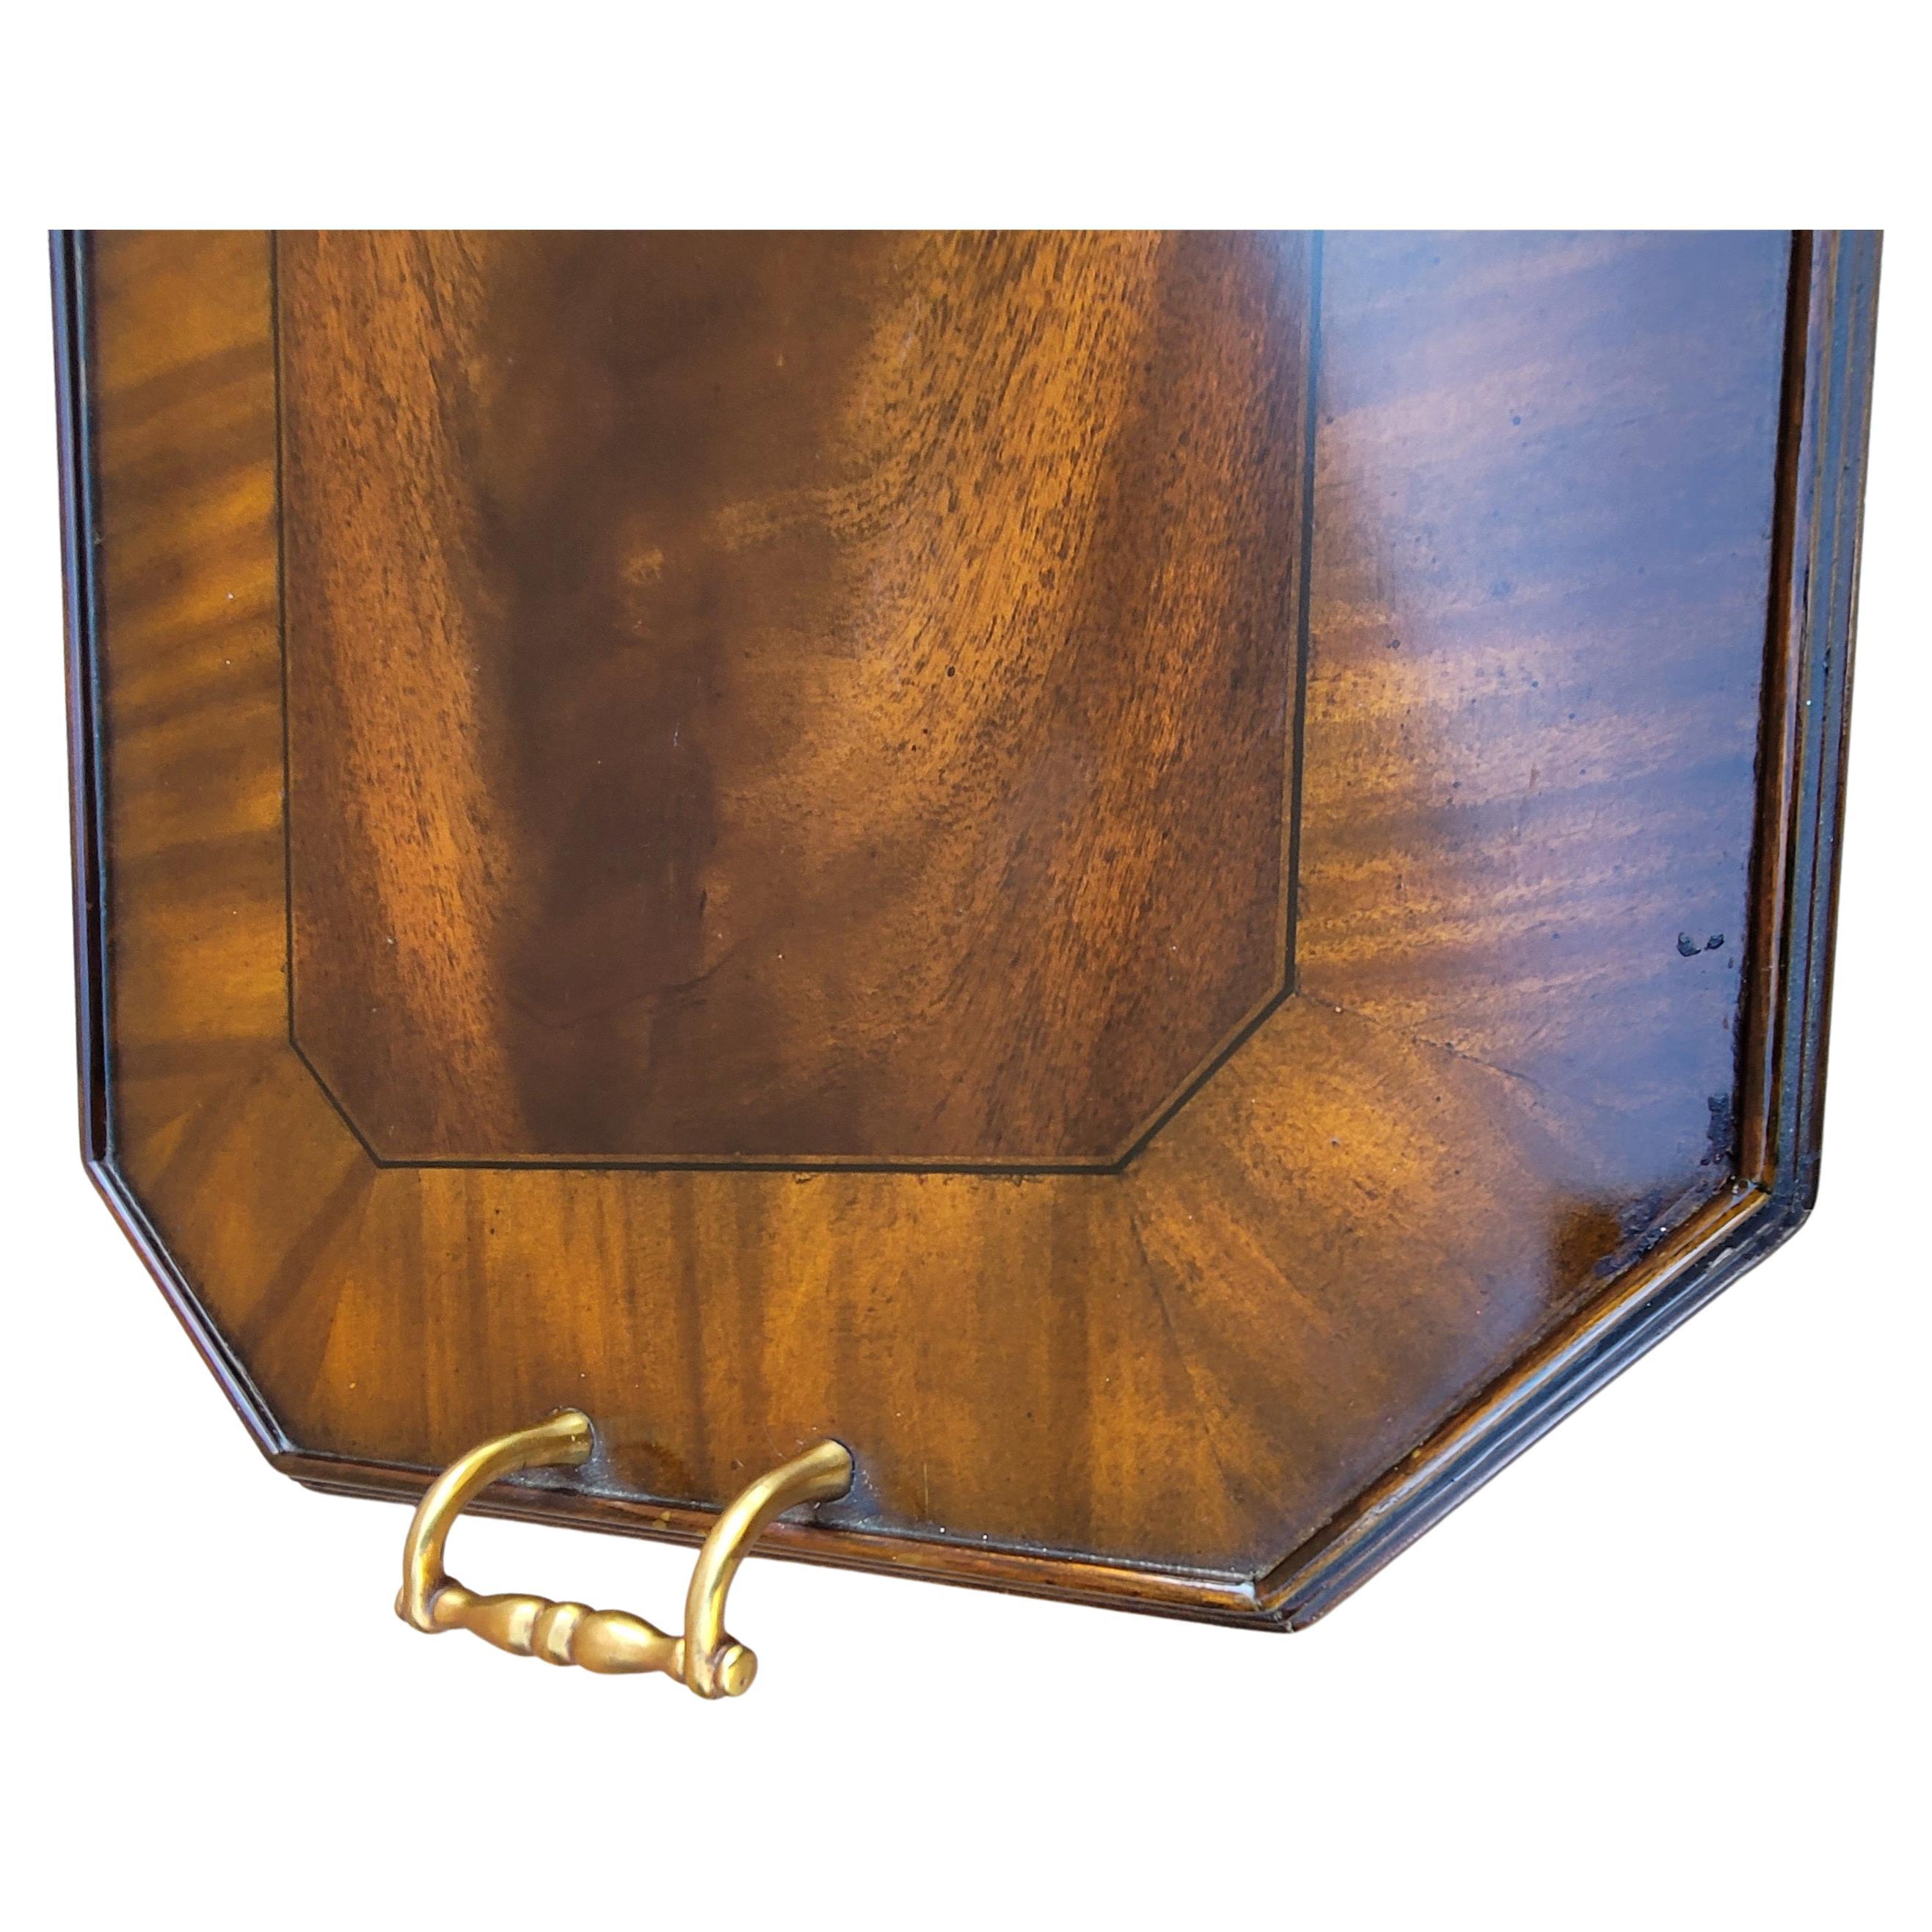 A large hand made Maitland-Smith inlaid and banded flame mahogany serving tray in George III style. Felt lined bottom to protect your tables tops. Measures 25